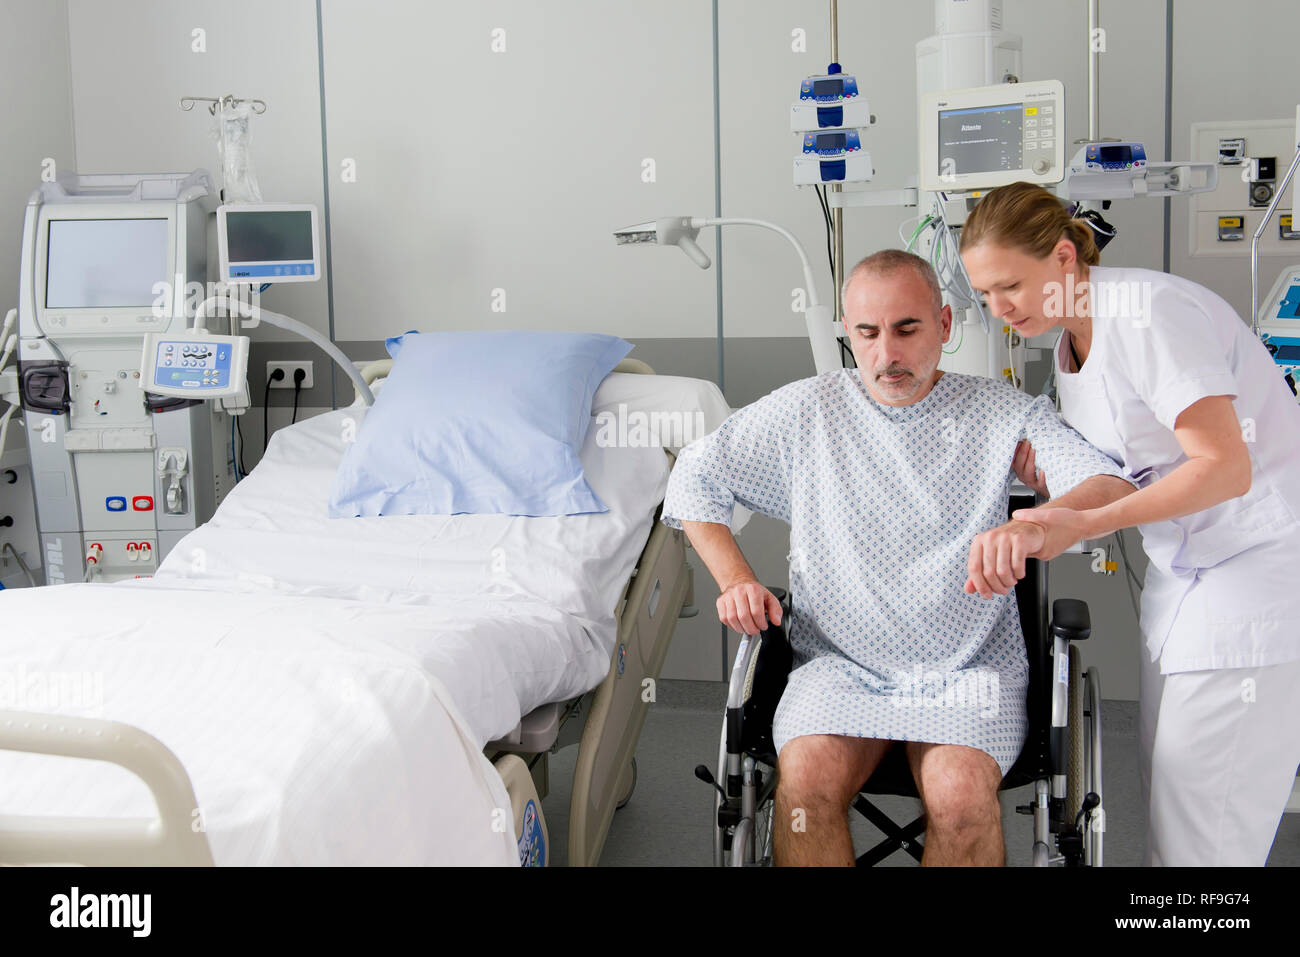 Private hospital “Clinique Saint Exupery de Toulouse”, clinic specializing in the treatment of kidney disease, renal disease. Woman, nurse or nursing  Stock Photo